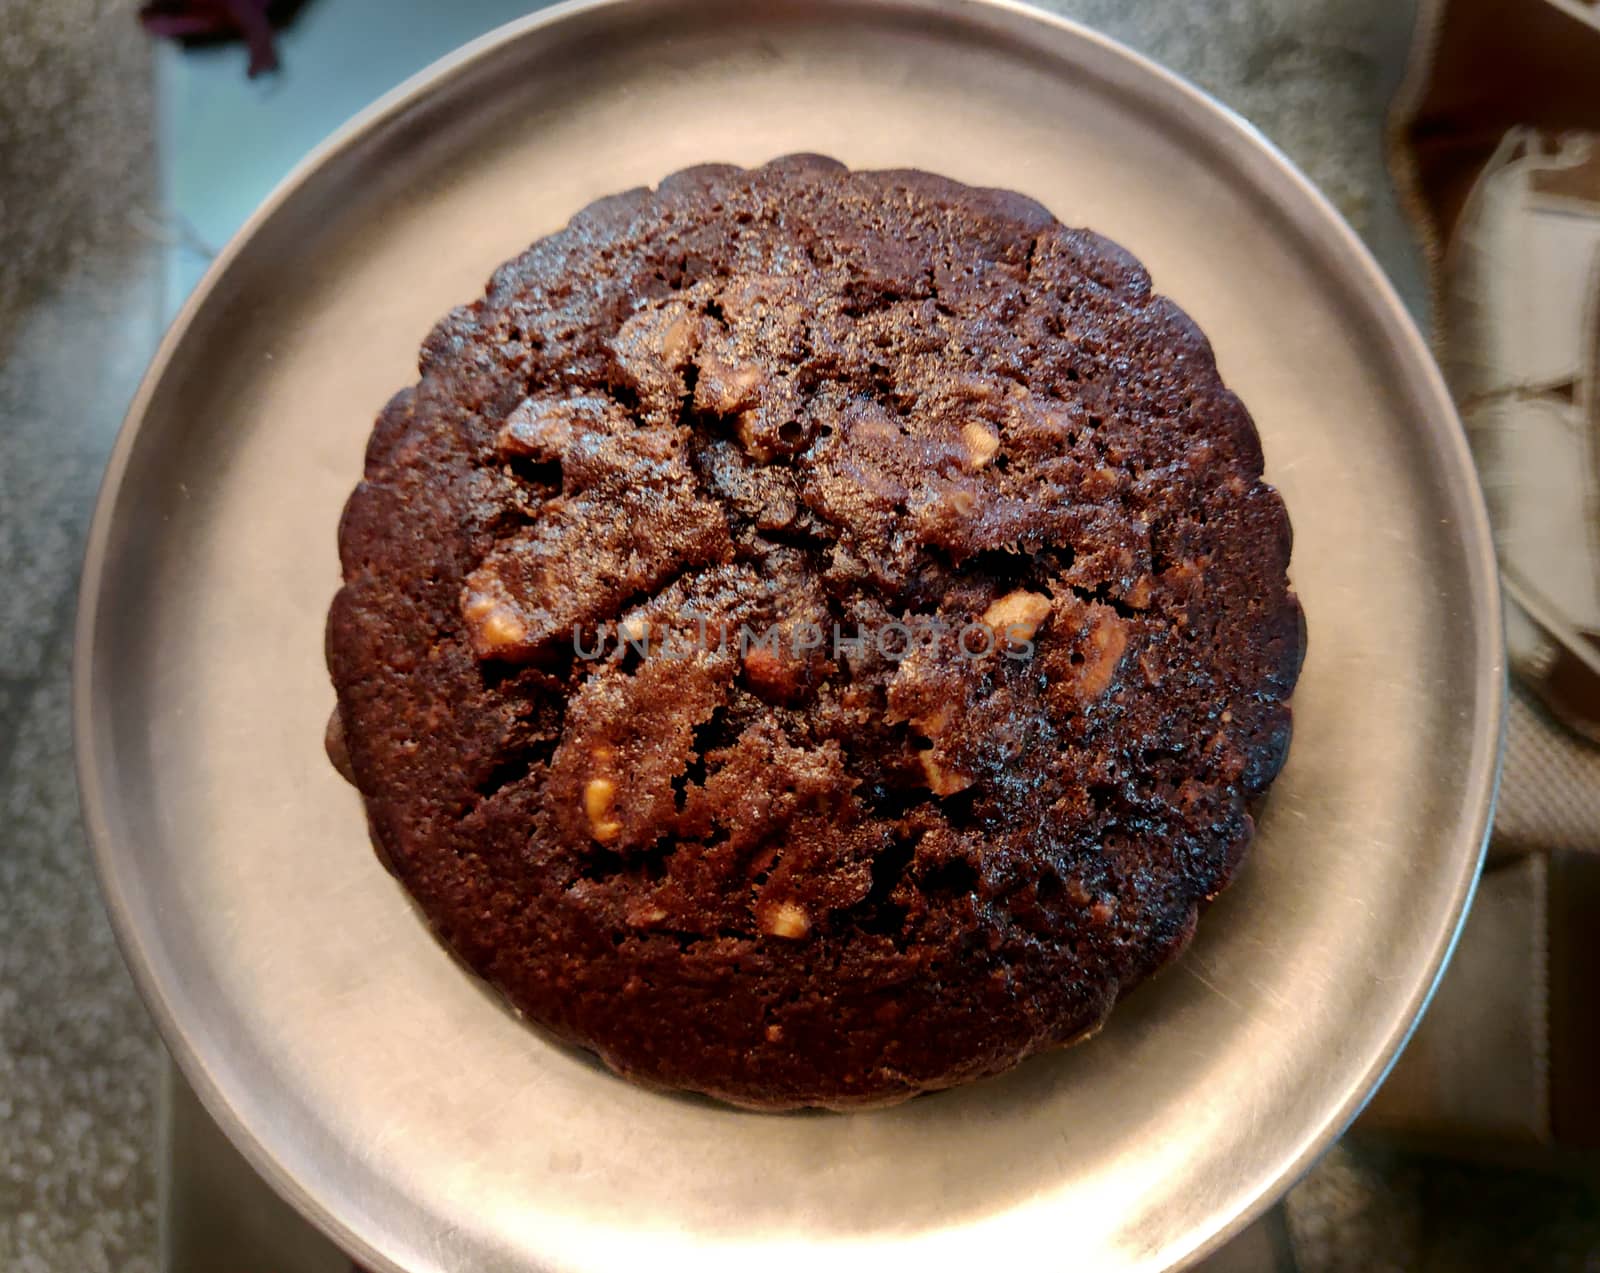 A chocolate walnut muffin on a steel plate in yellow light by mshivangi92